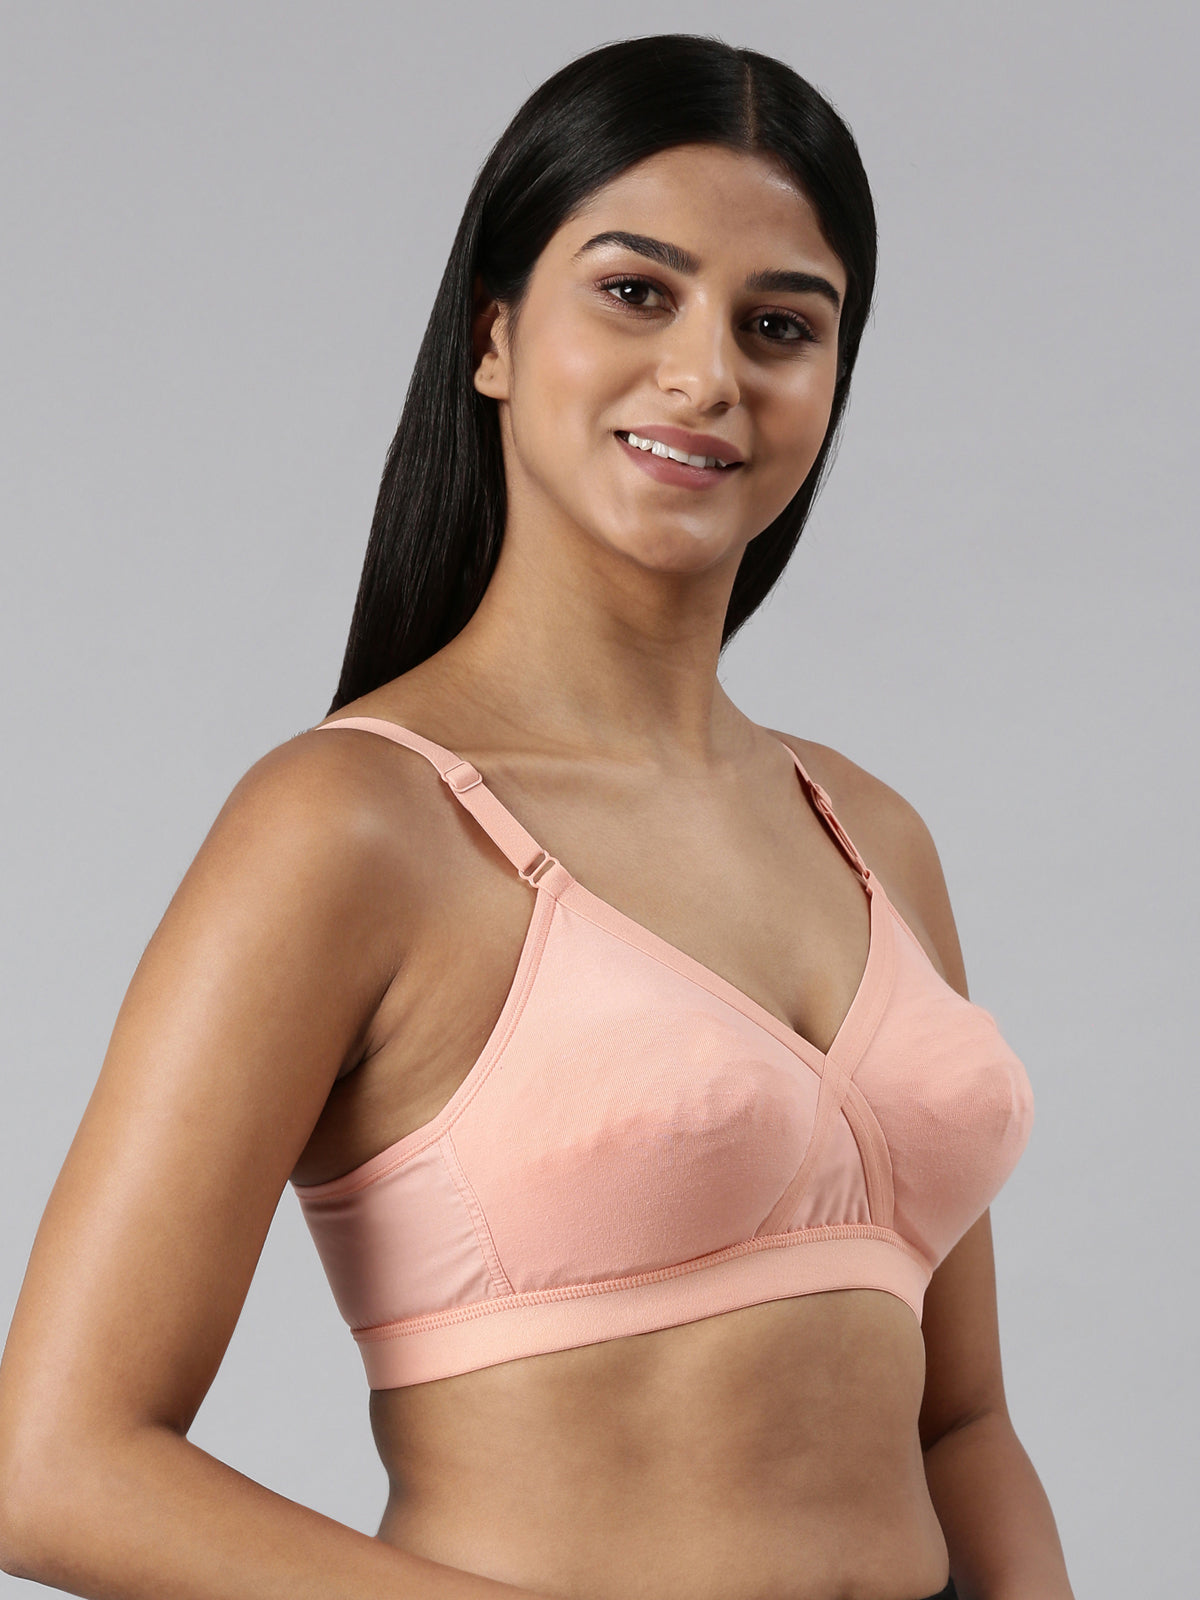 blossom-cotton cross-peach3-Woven knitted-support bra